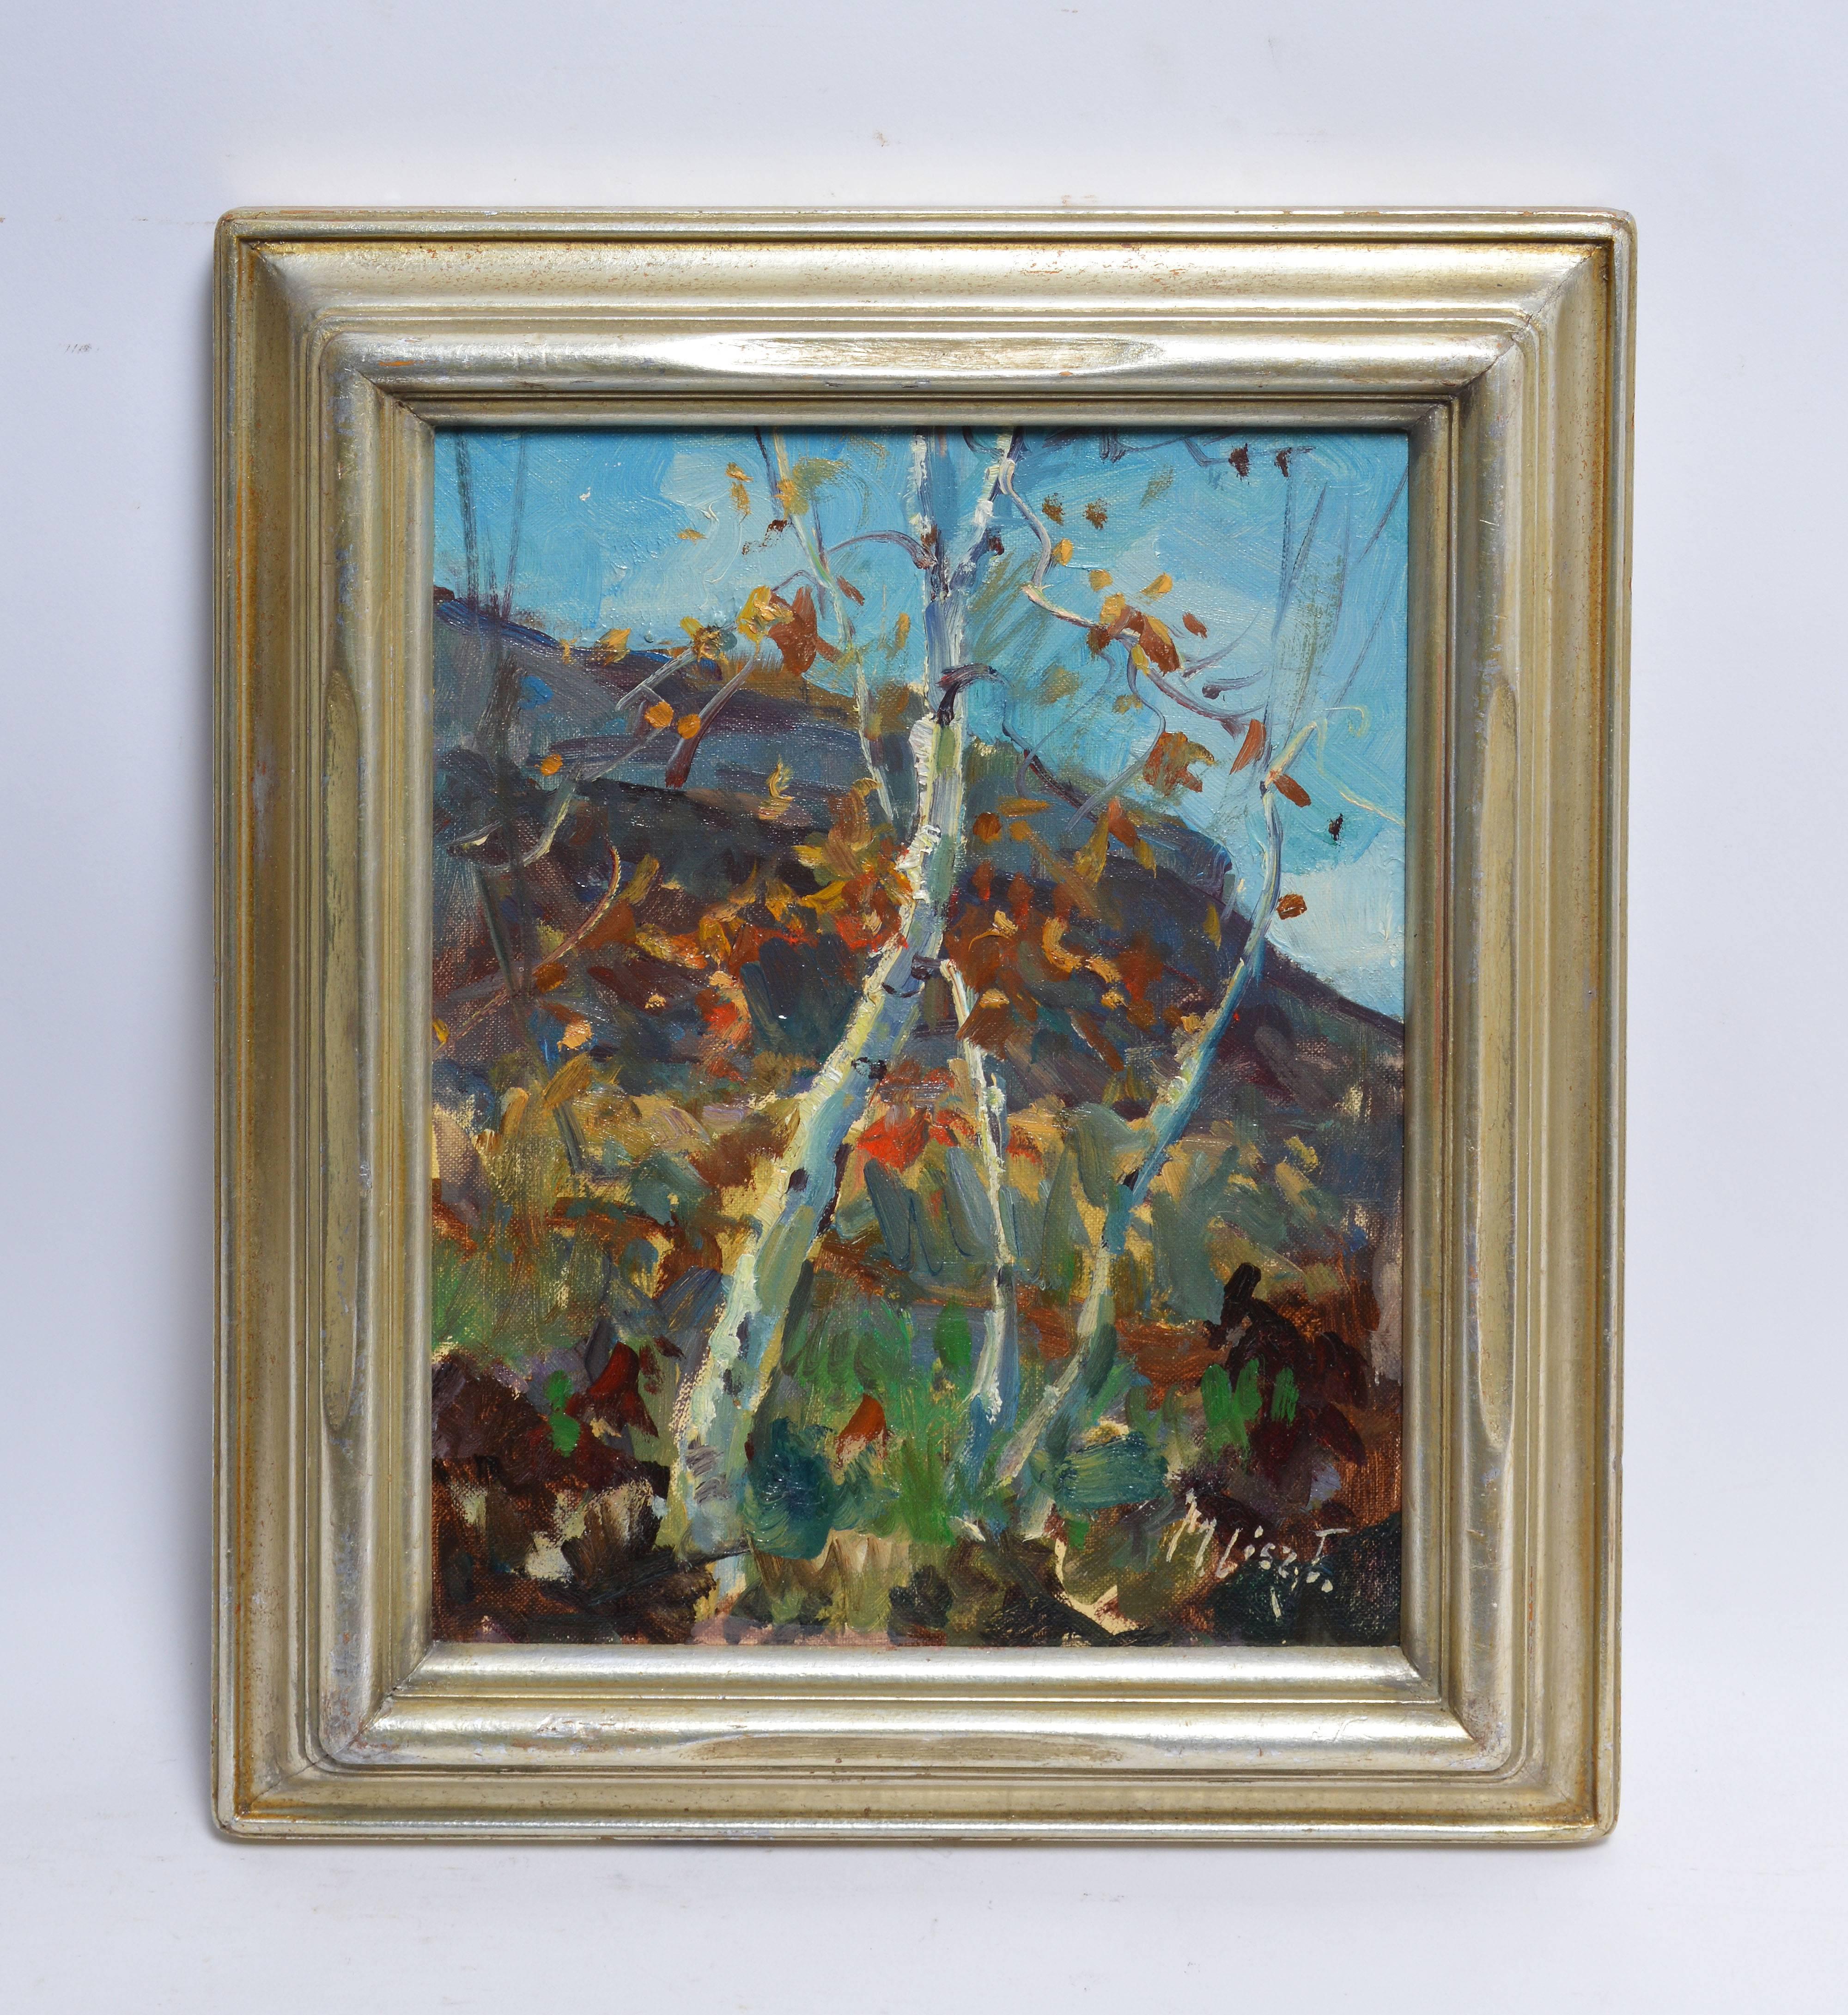 Impressionist landscape painting with a birch tree by Maria Liszt (1902-1992). Oil on board, circa 1950. Signed lower right, 